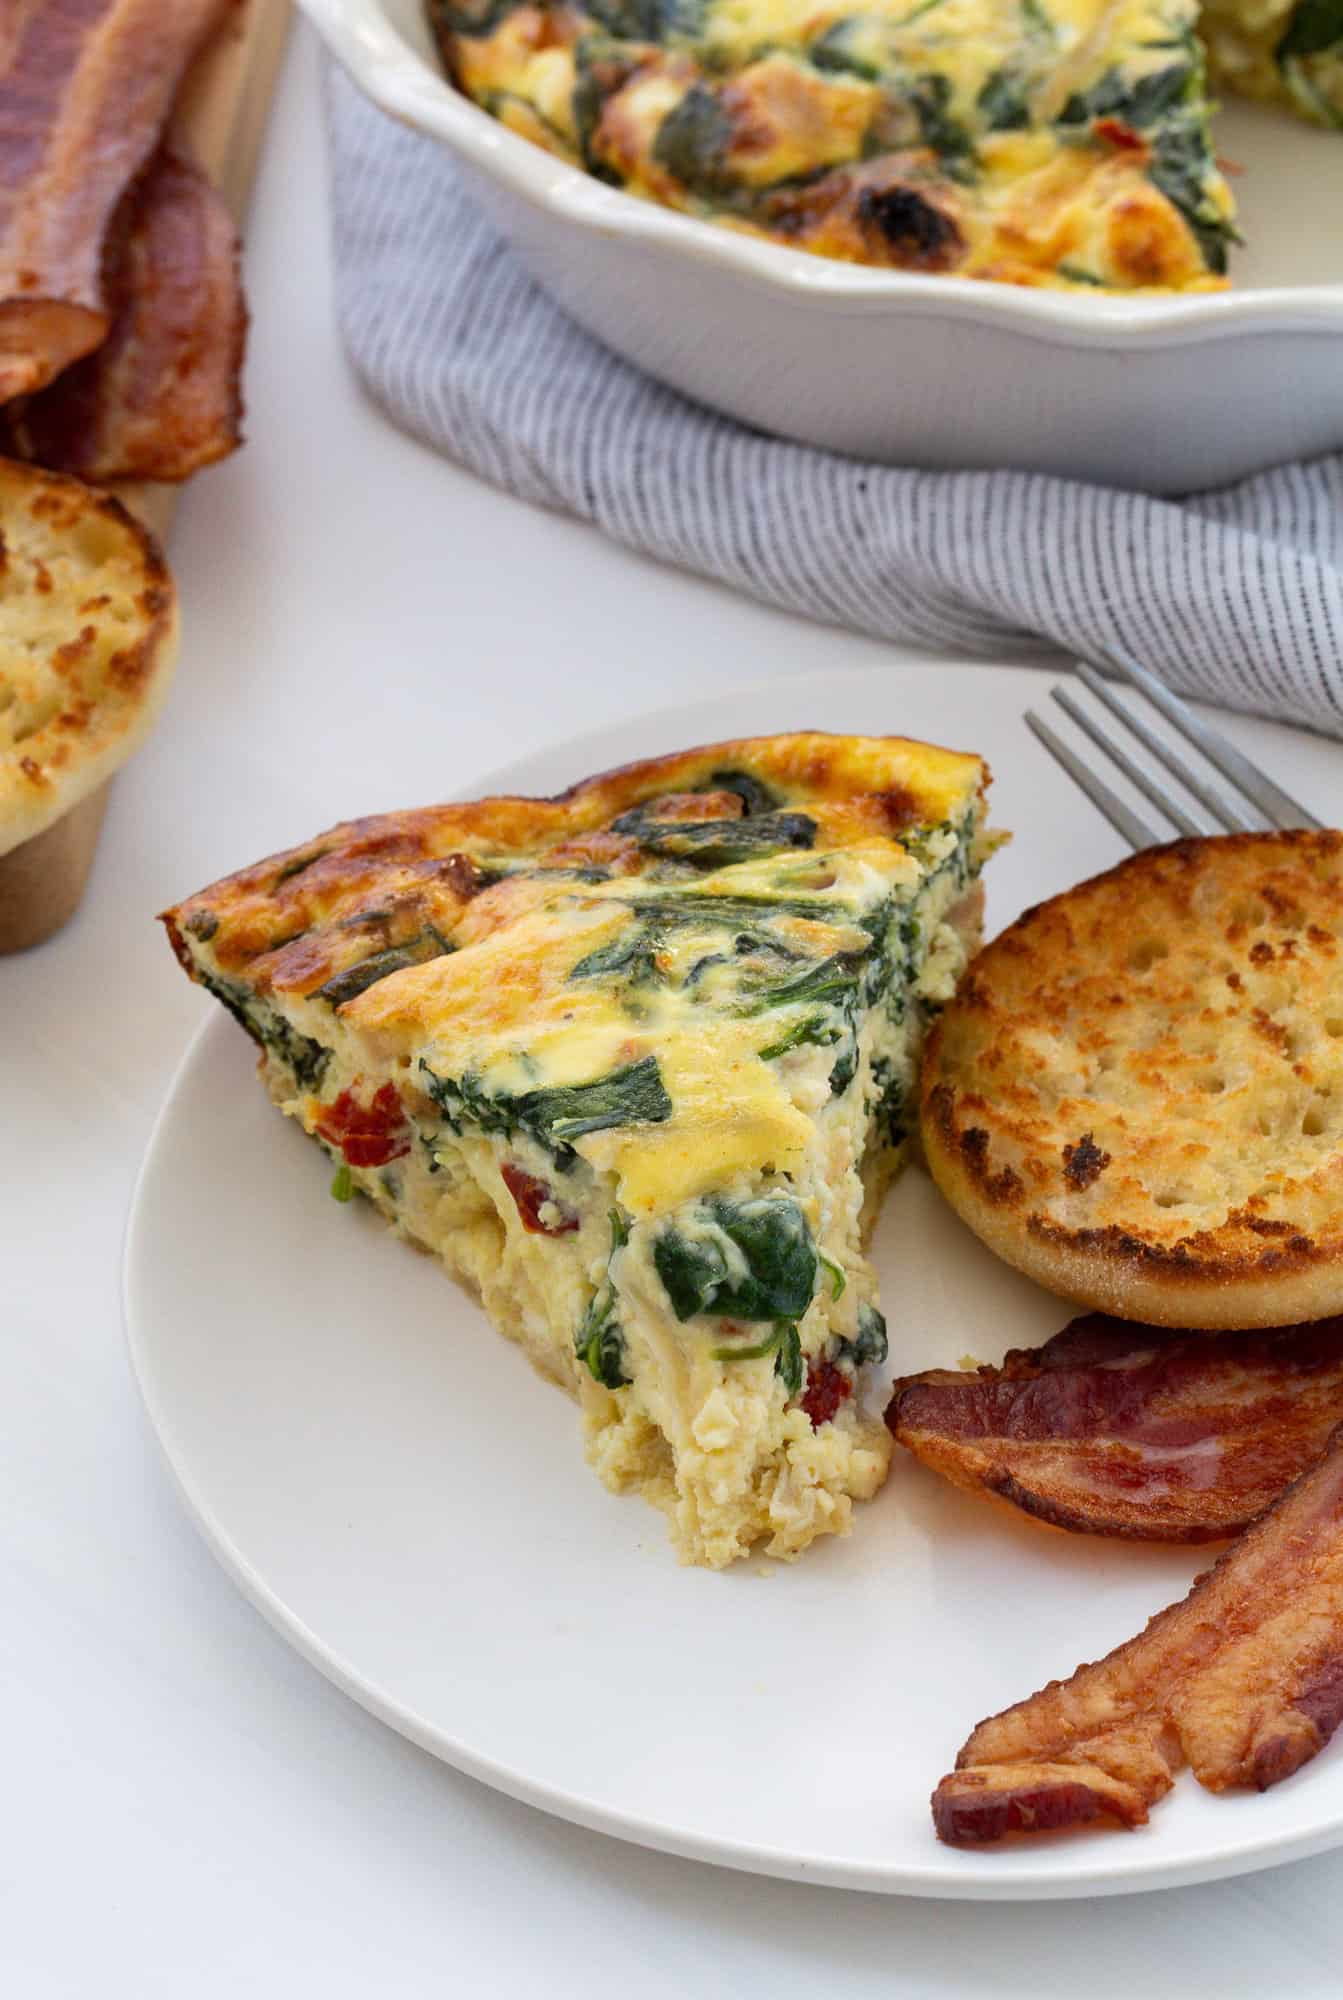 Crustless quiche on a plate with an english muffin and bacon.